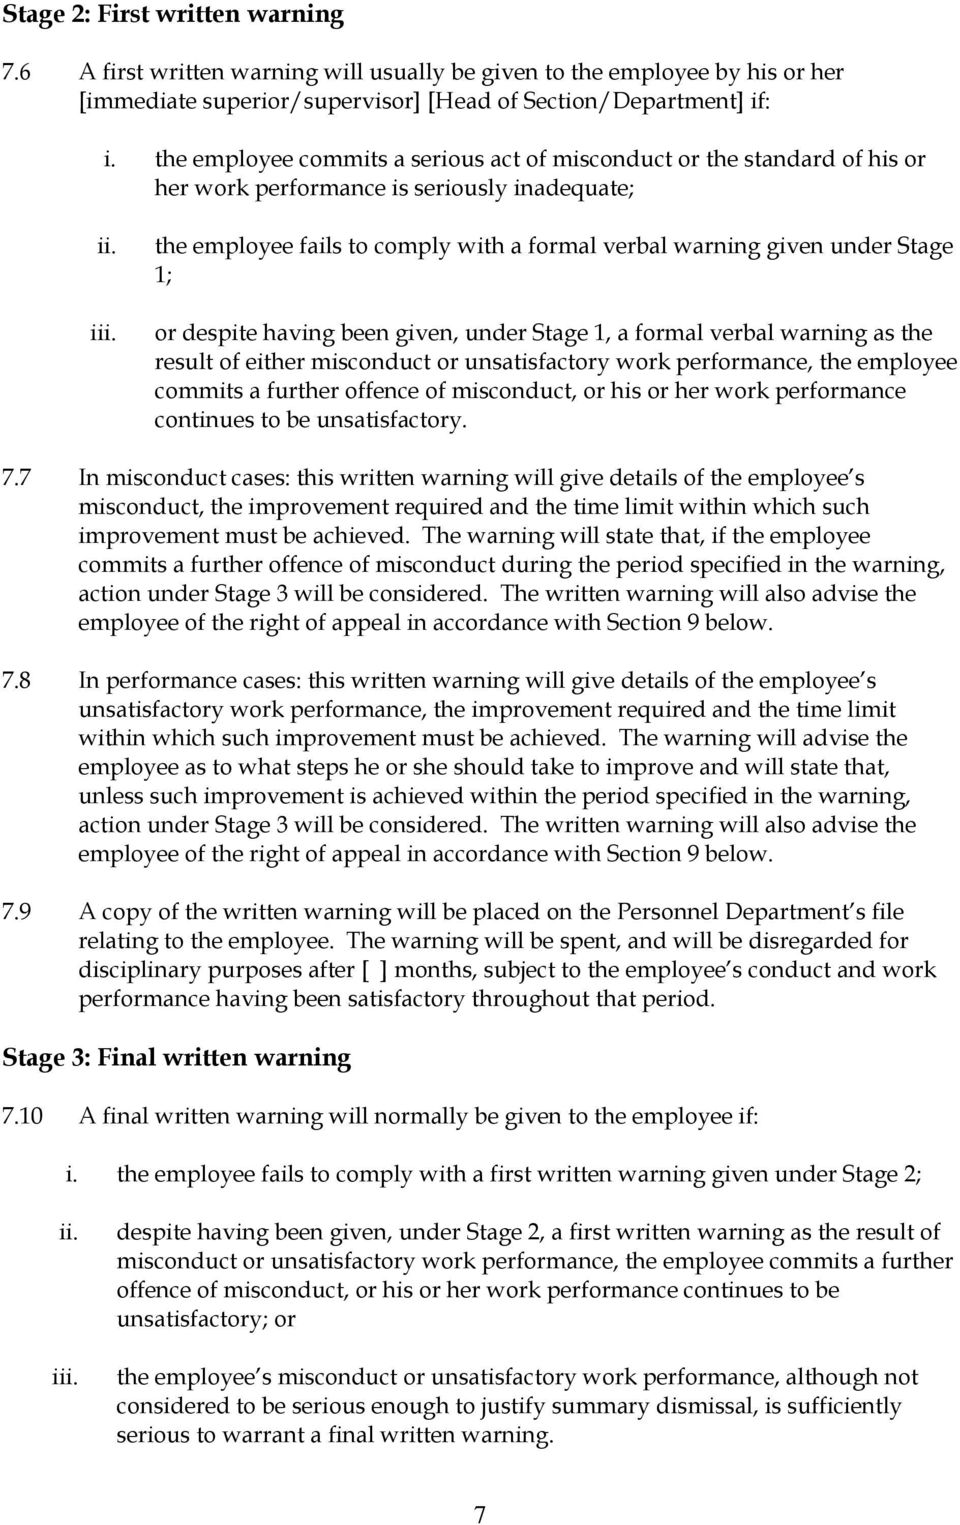 the employee fails to comply with a formal verbal warning given under Stage 1; or despite having been given, under Stage 1, a formal verbal warning as the result of either misconduct or